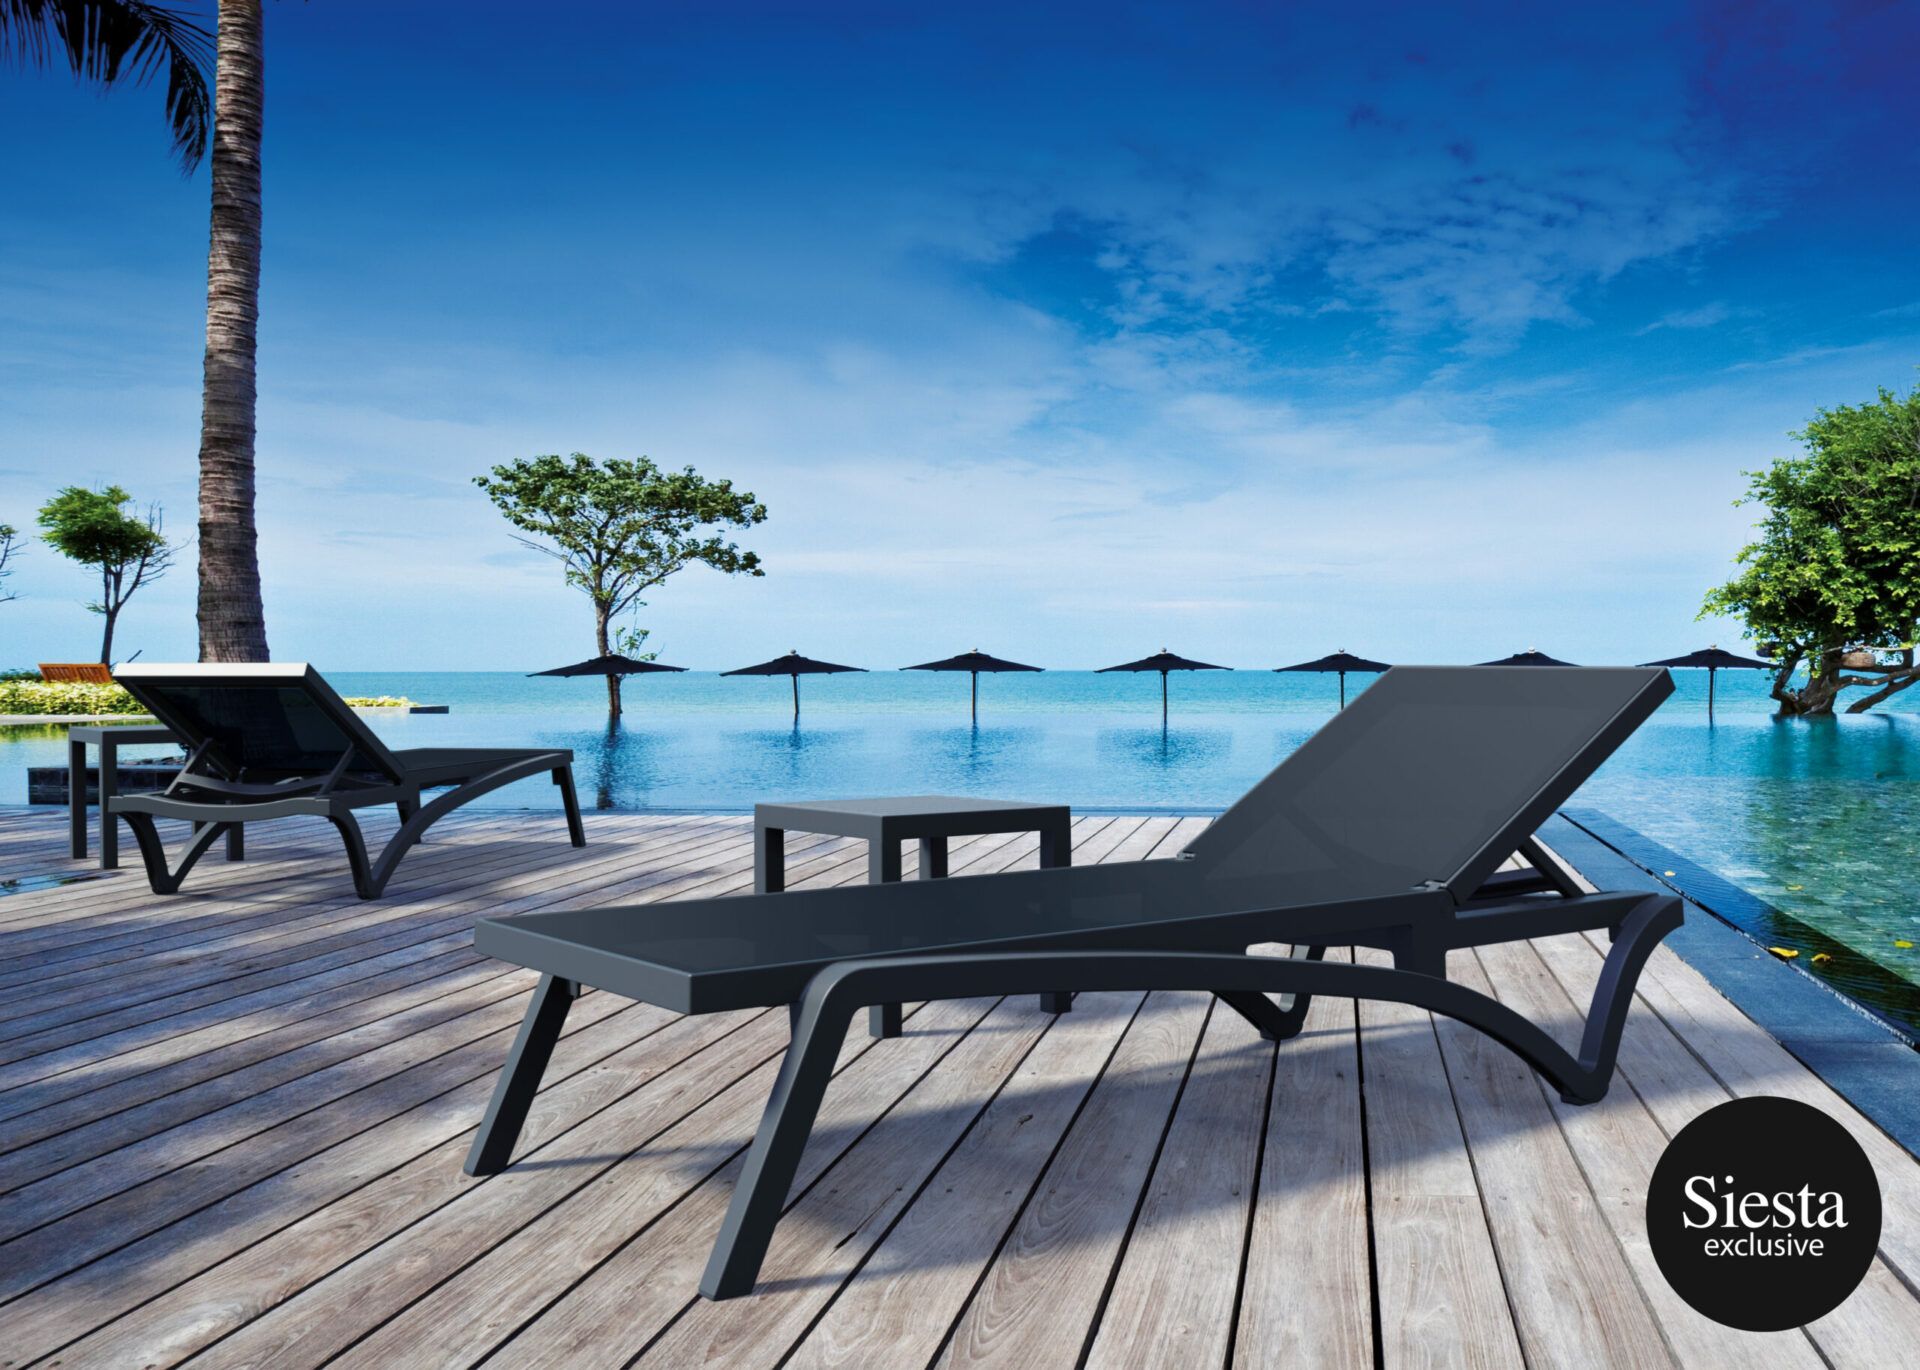 Pacific Sunlounger/Ocean Side Table 4 Pc Package - Black